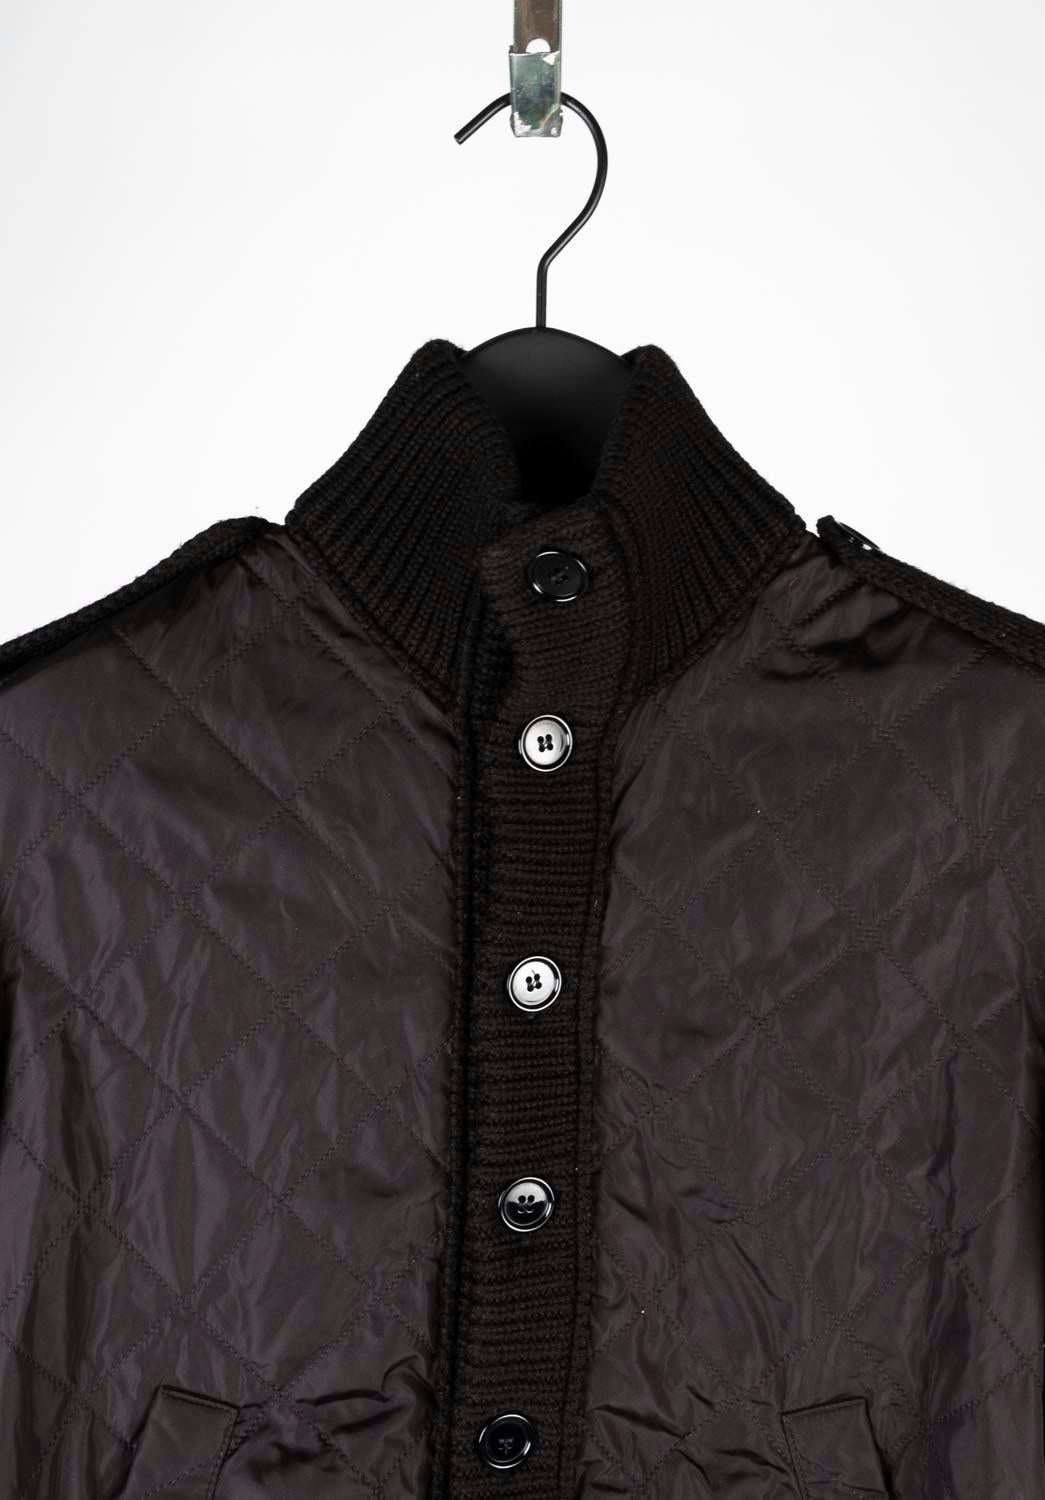 Check my other listings. Have many more designer clothes for sale. Open to any offers.
Item for sale is 100% genuine Prada Cardigan Men Jacket, S572
Color: Black
(An actual color may a bit vary due to individual computer screen